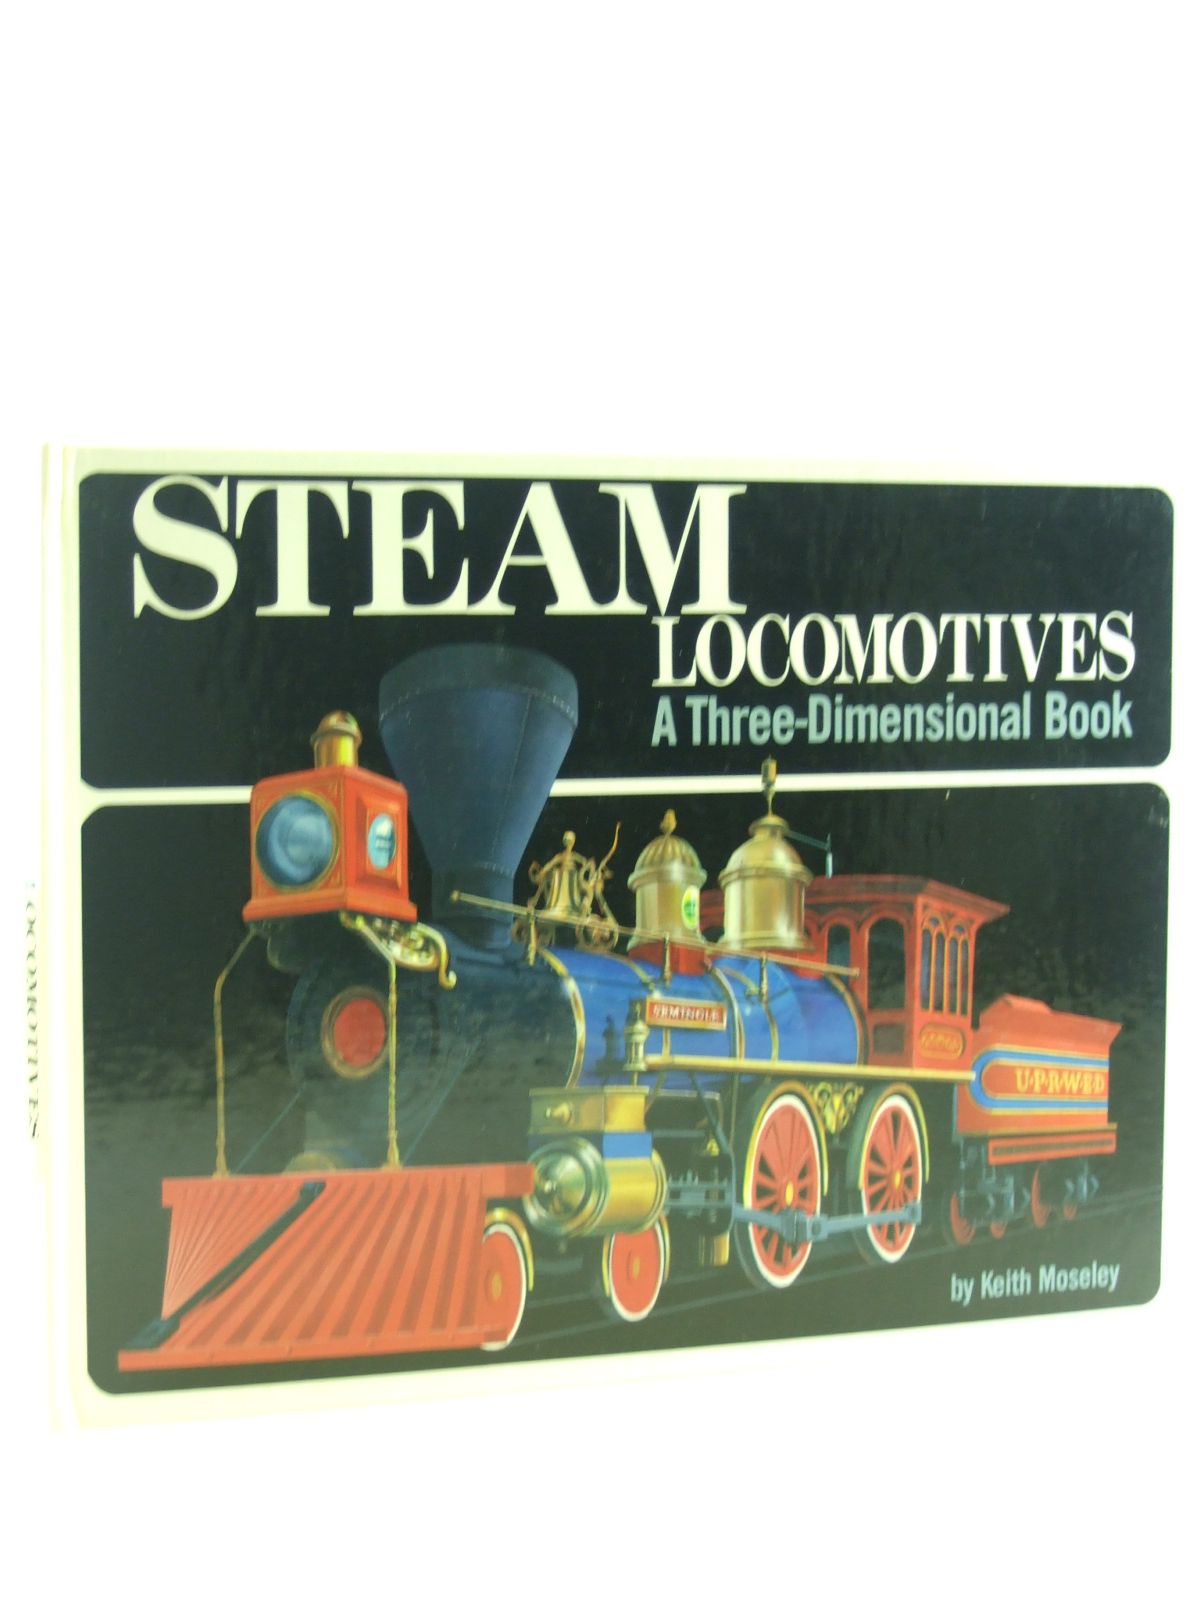 Photo of STEAM LOCOMOTIVES A THREE-DIMENSIONAL BOOK written by Moseley, Keith Whitehouse, Alan illustrated by Bartle, Brian Watson, Brian published by William Collins Sons &amp; Co. Ltd. (STOCK CODE: 1107151)  for sale by Stella & Rose's Books